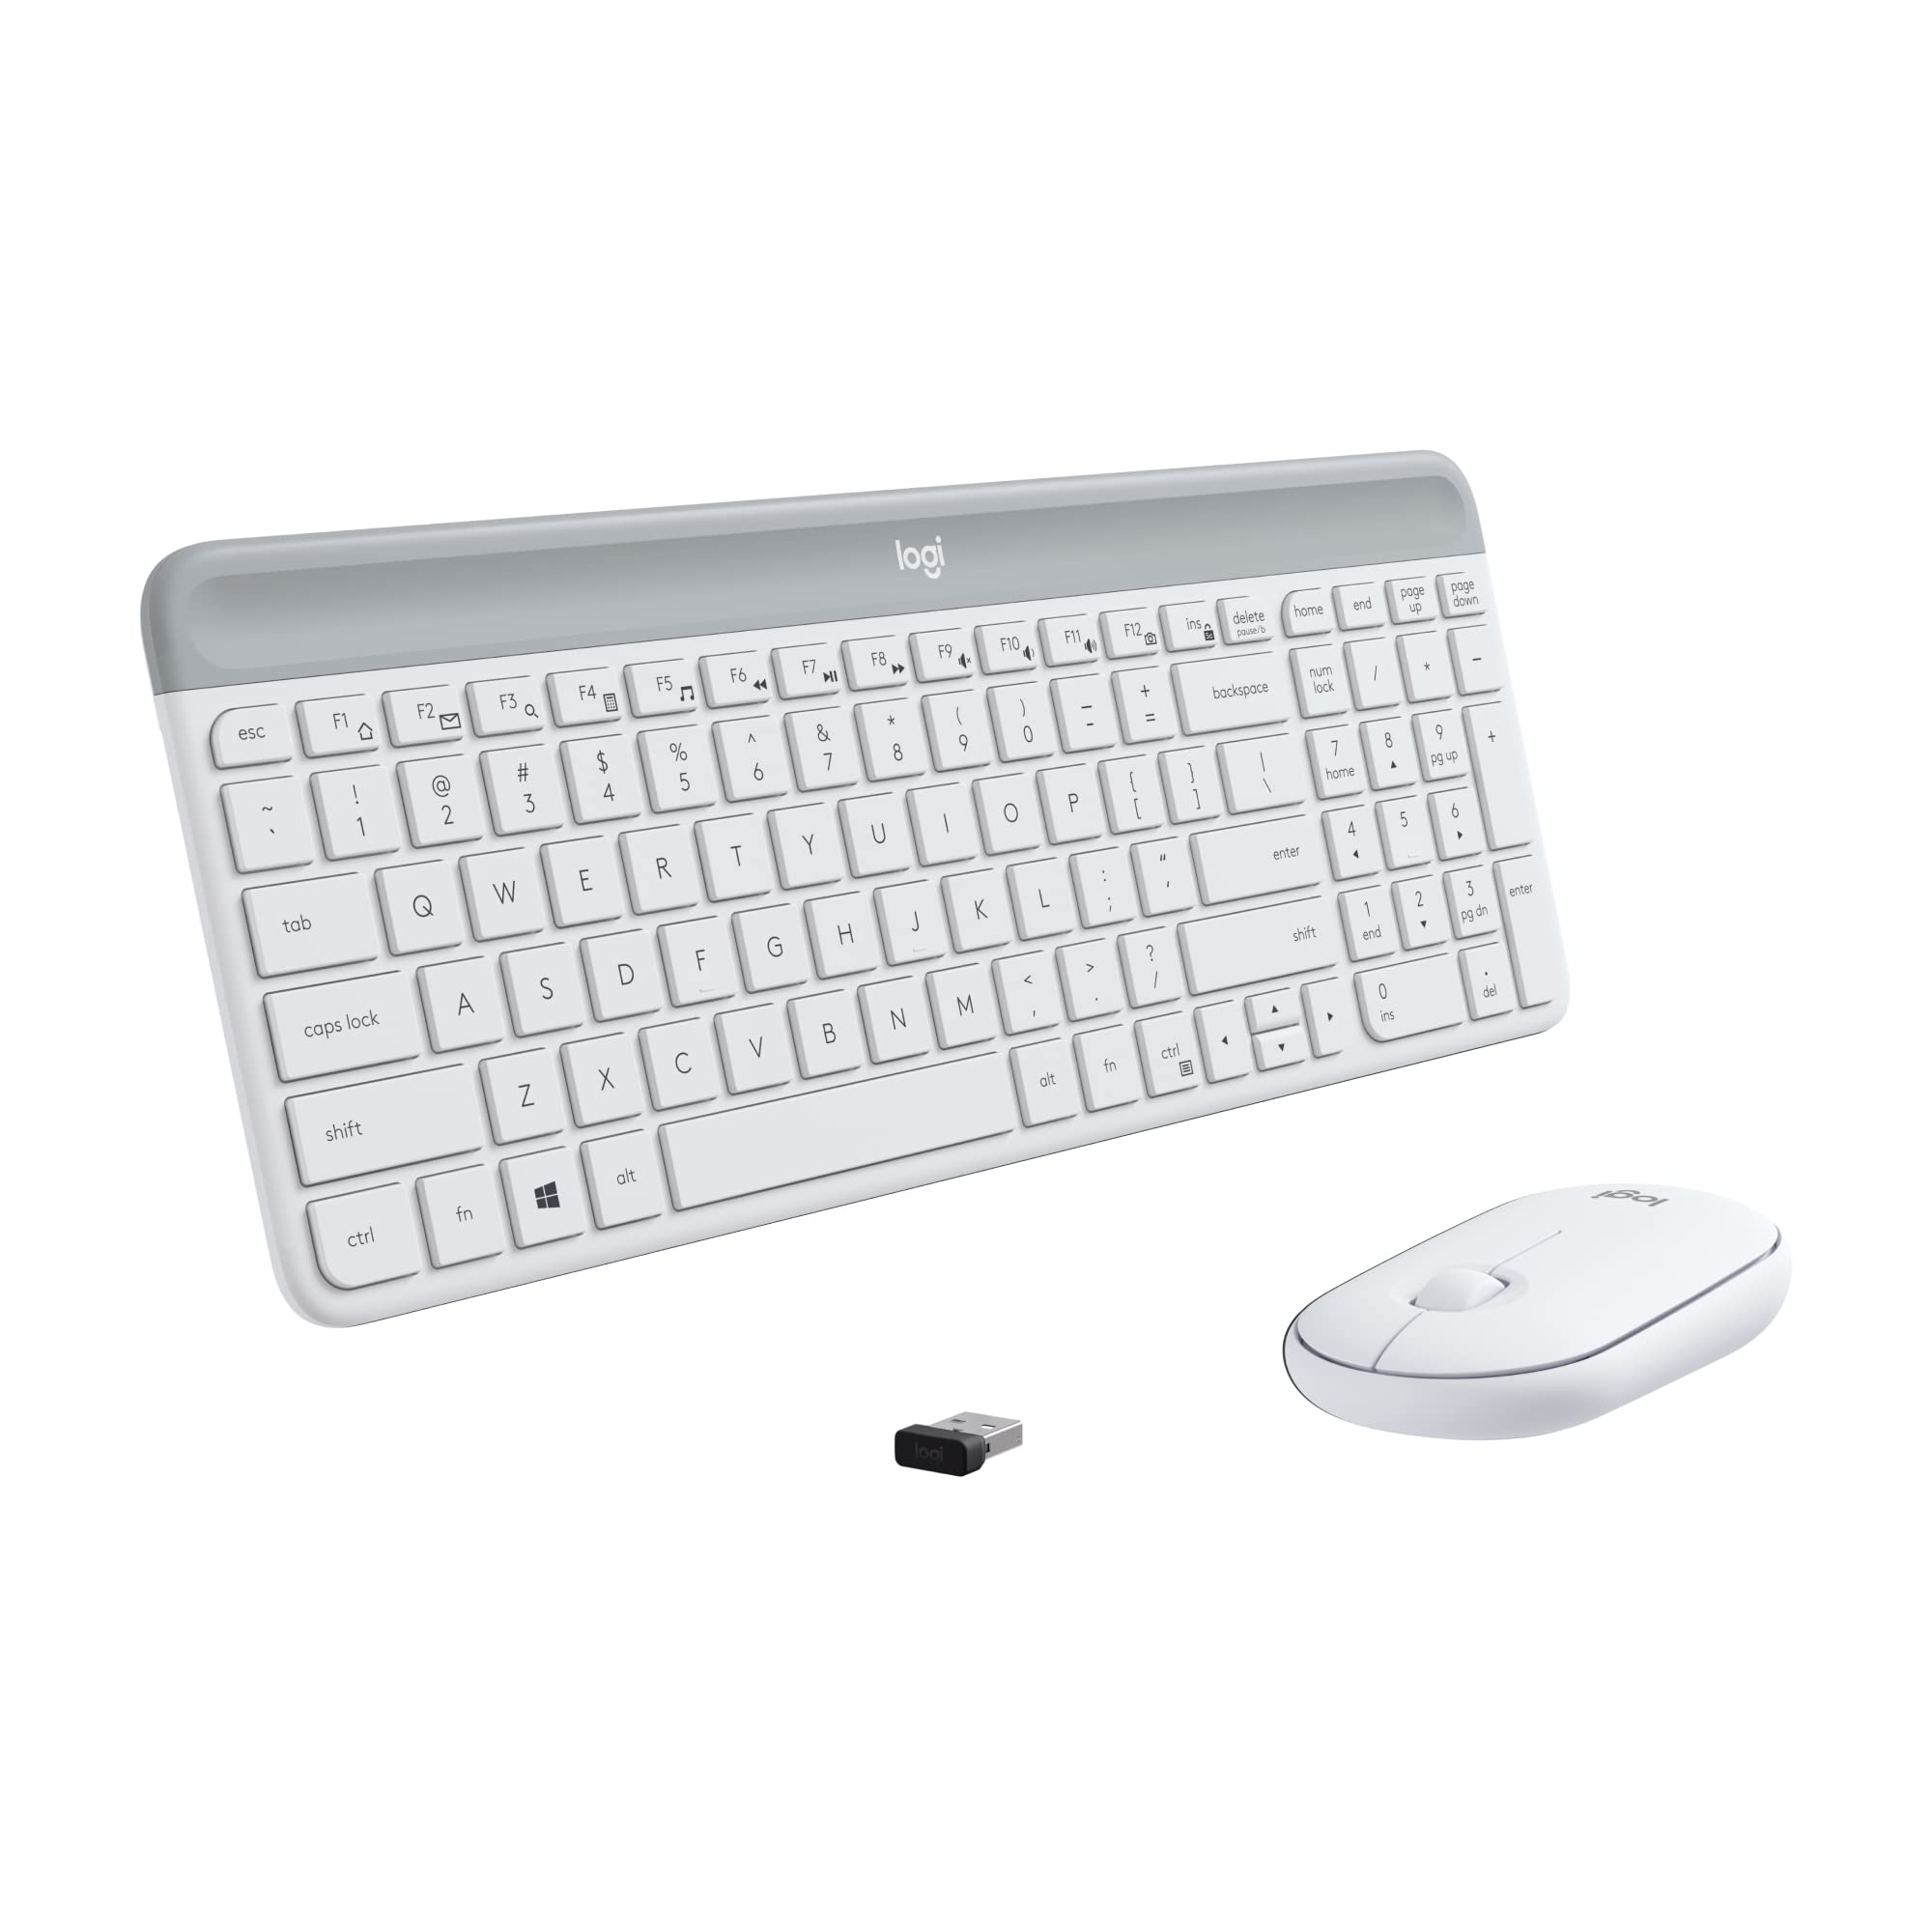 Logitech MK470 Slim Wireless Keyboard and Mouse Combo - Modern Compact Layout, Ultra Quiet, 2.4 GHz USB Receiver, Plug n' Play Connectivity, Compatible with Windows - Only $29.99